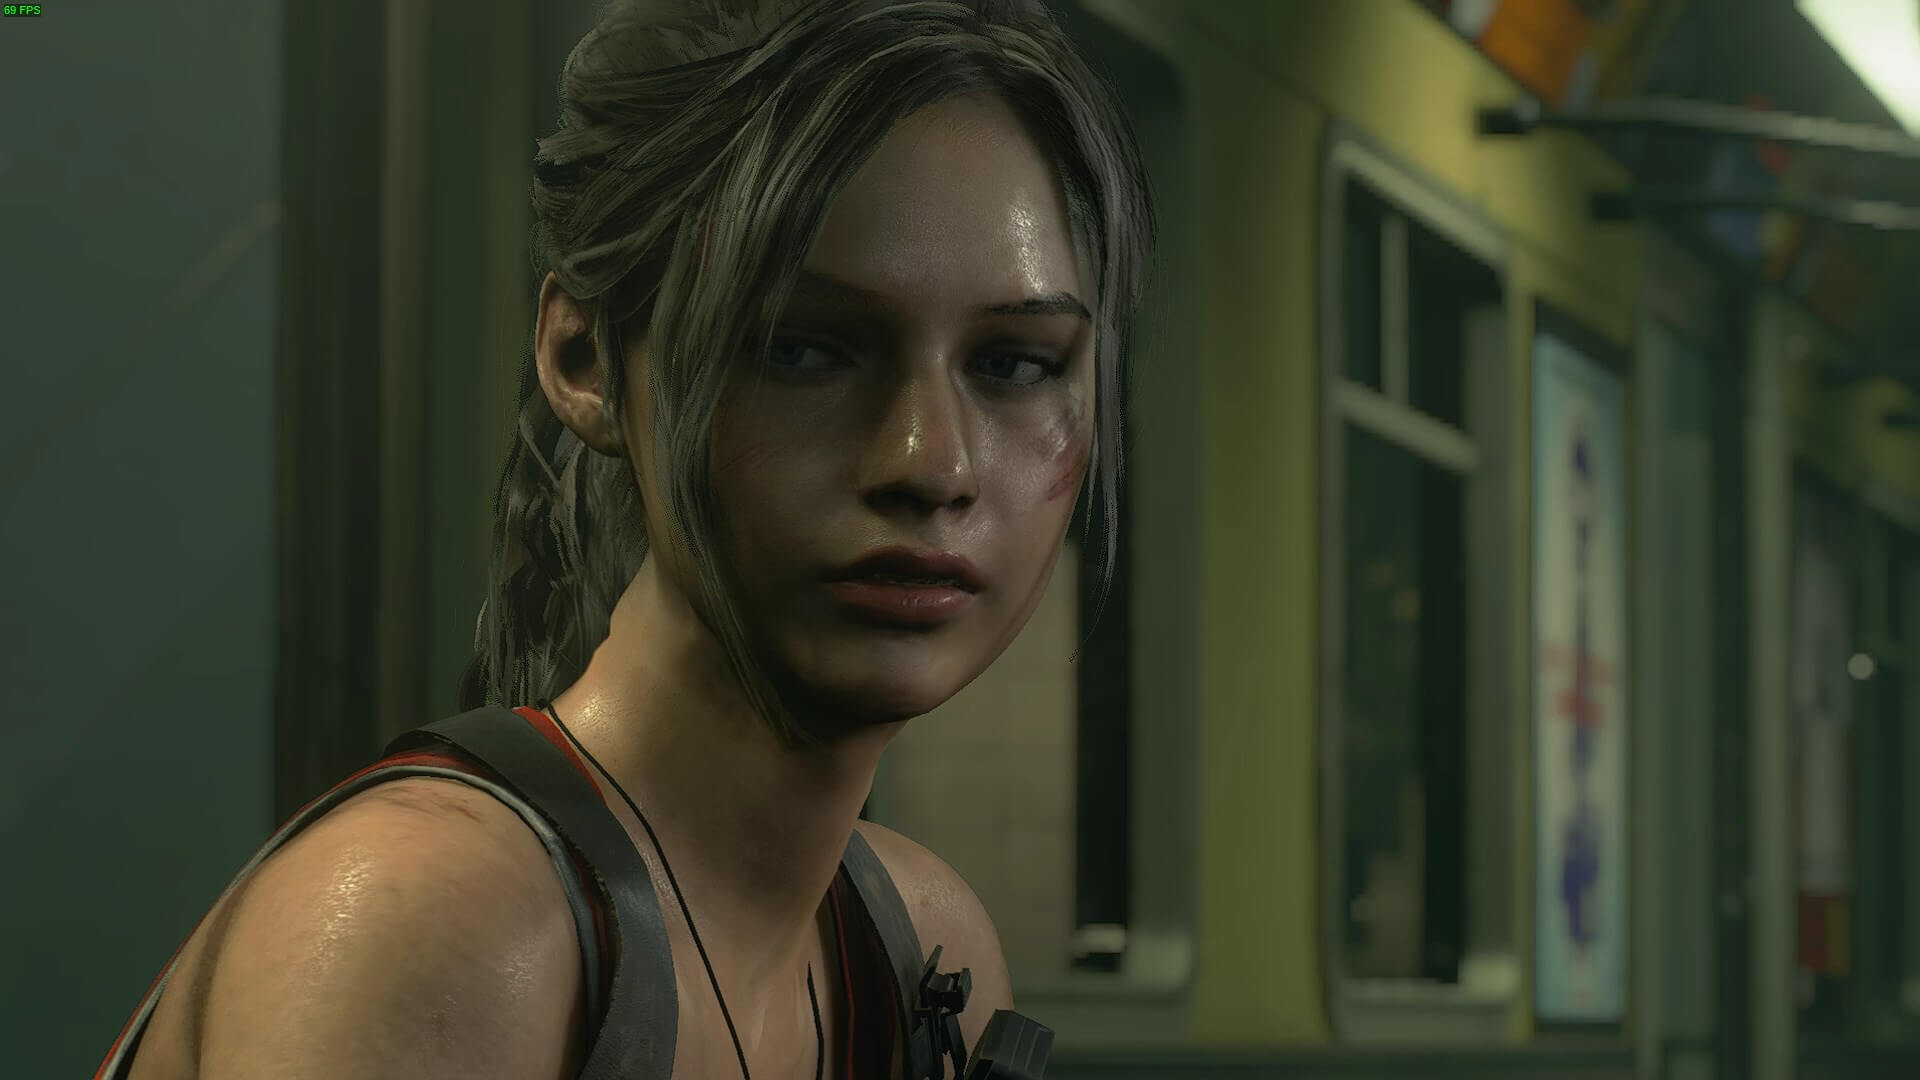 You can now play as Claire Redfield or Ada Wong in Resident Evil 3